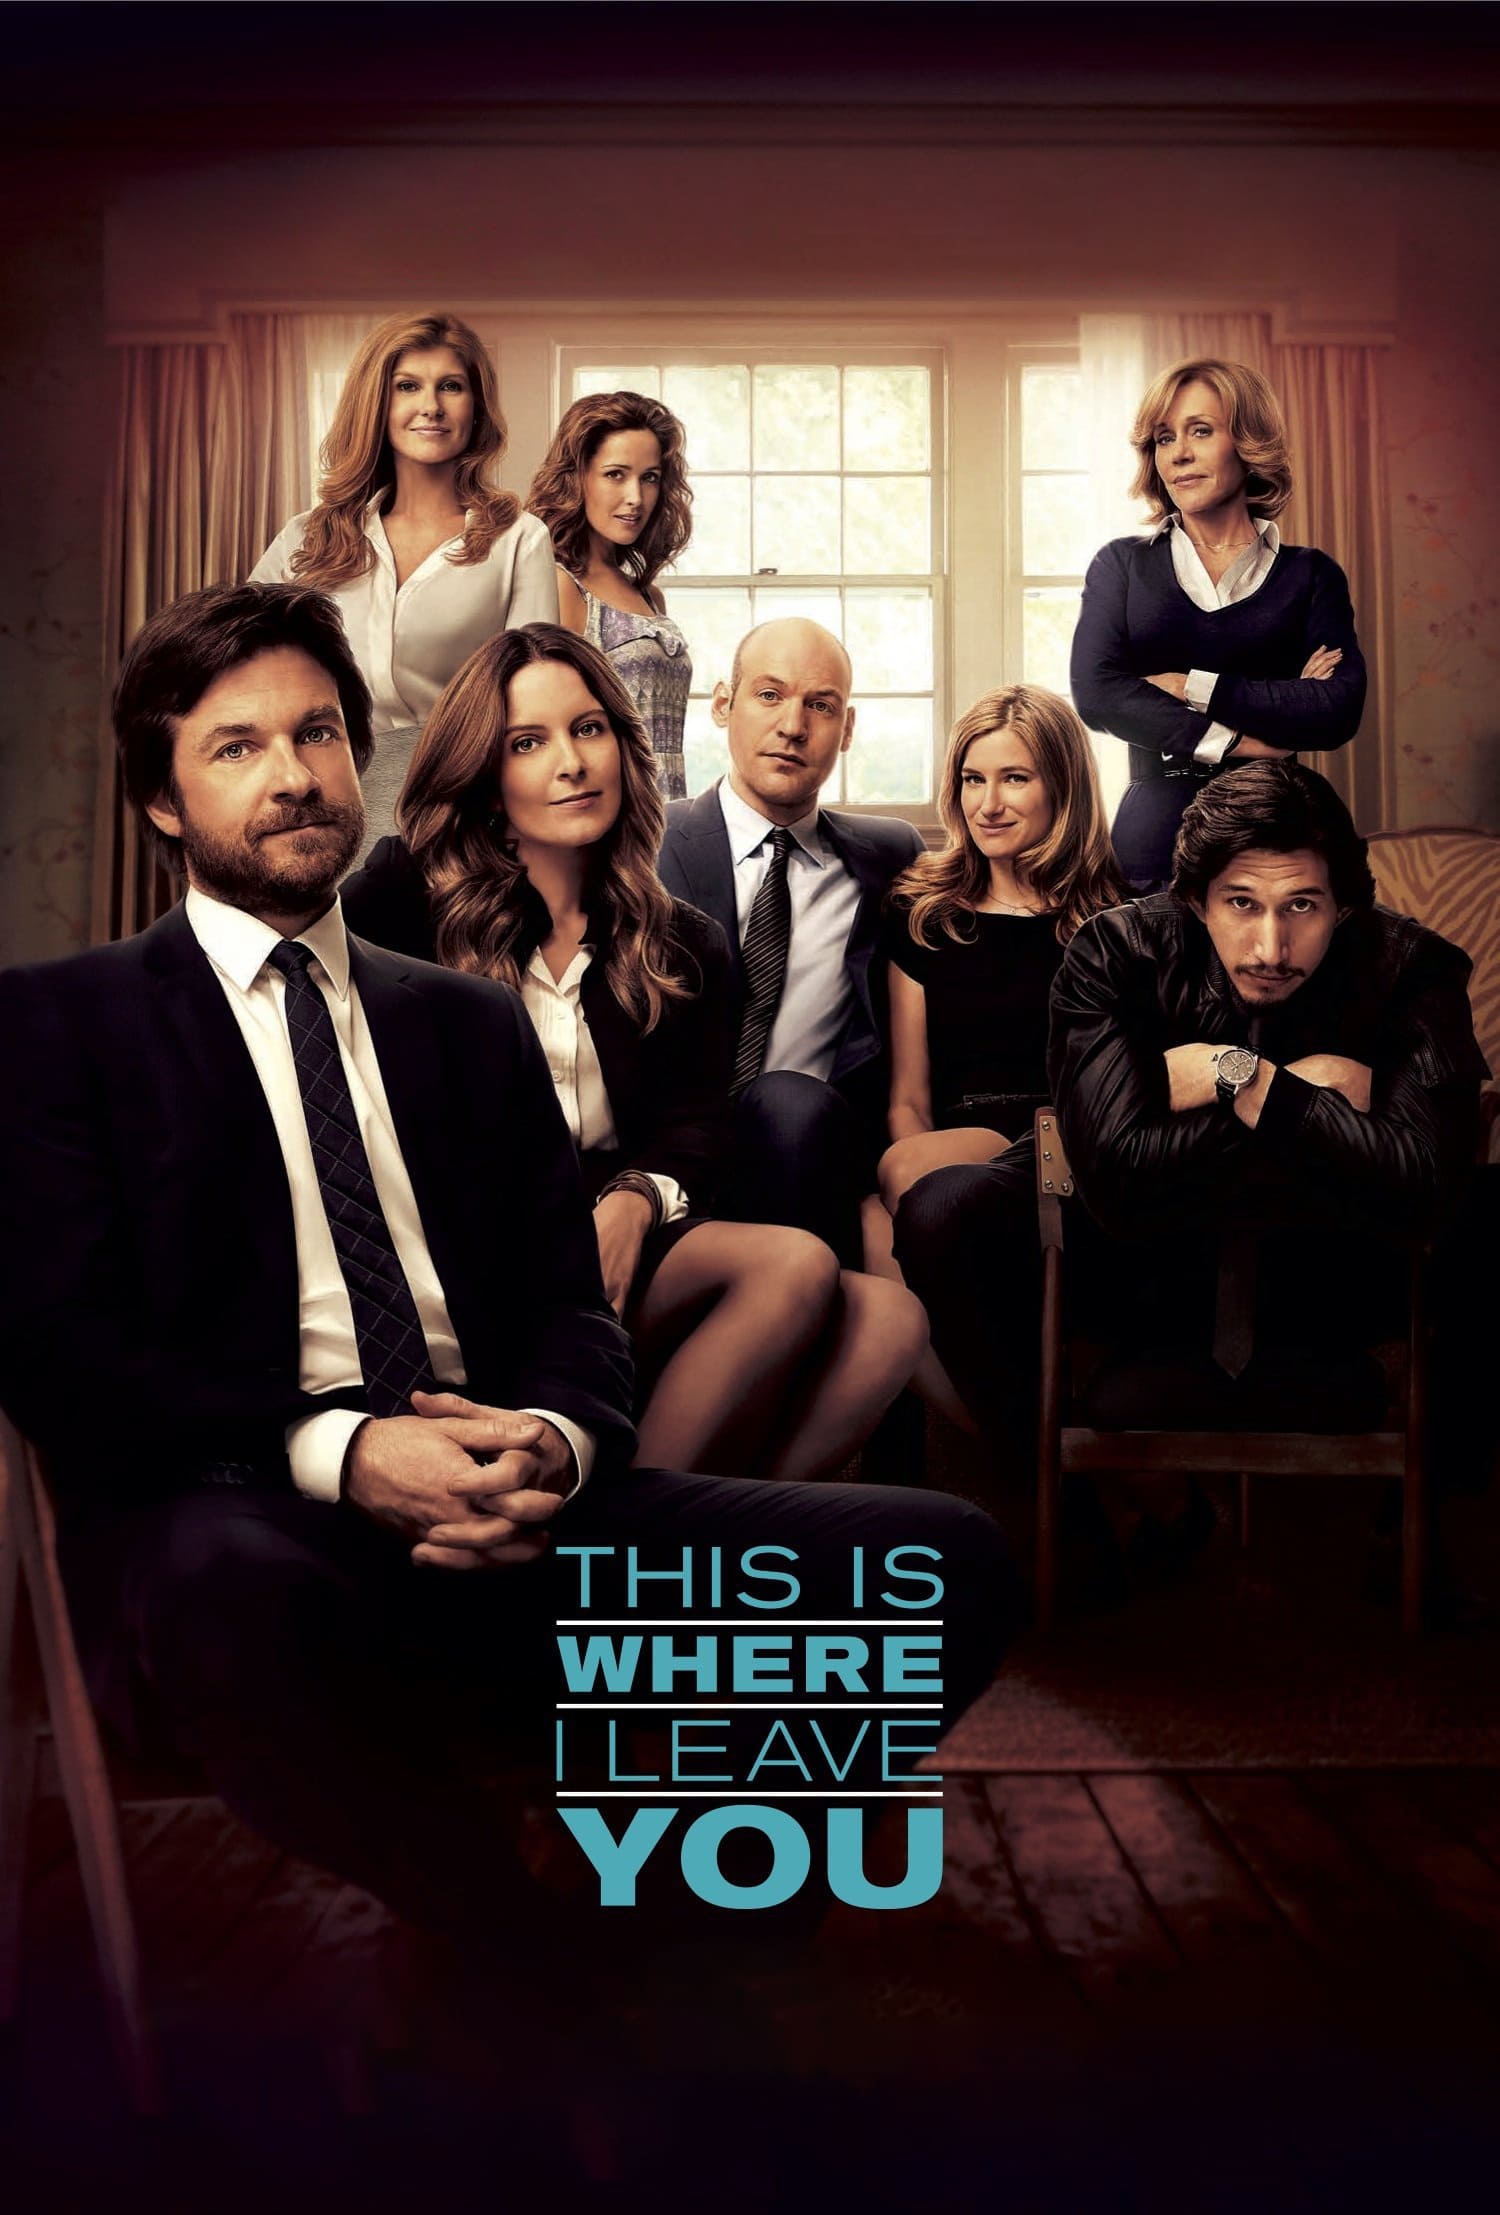 This Is Where I Leave You movie poster